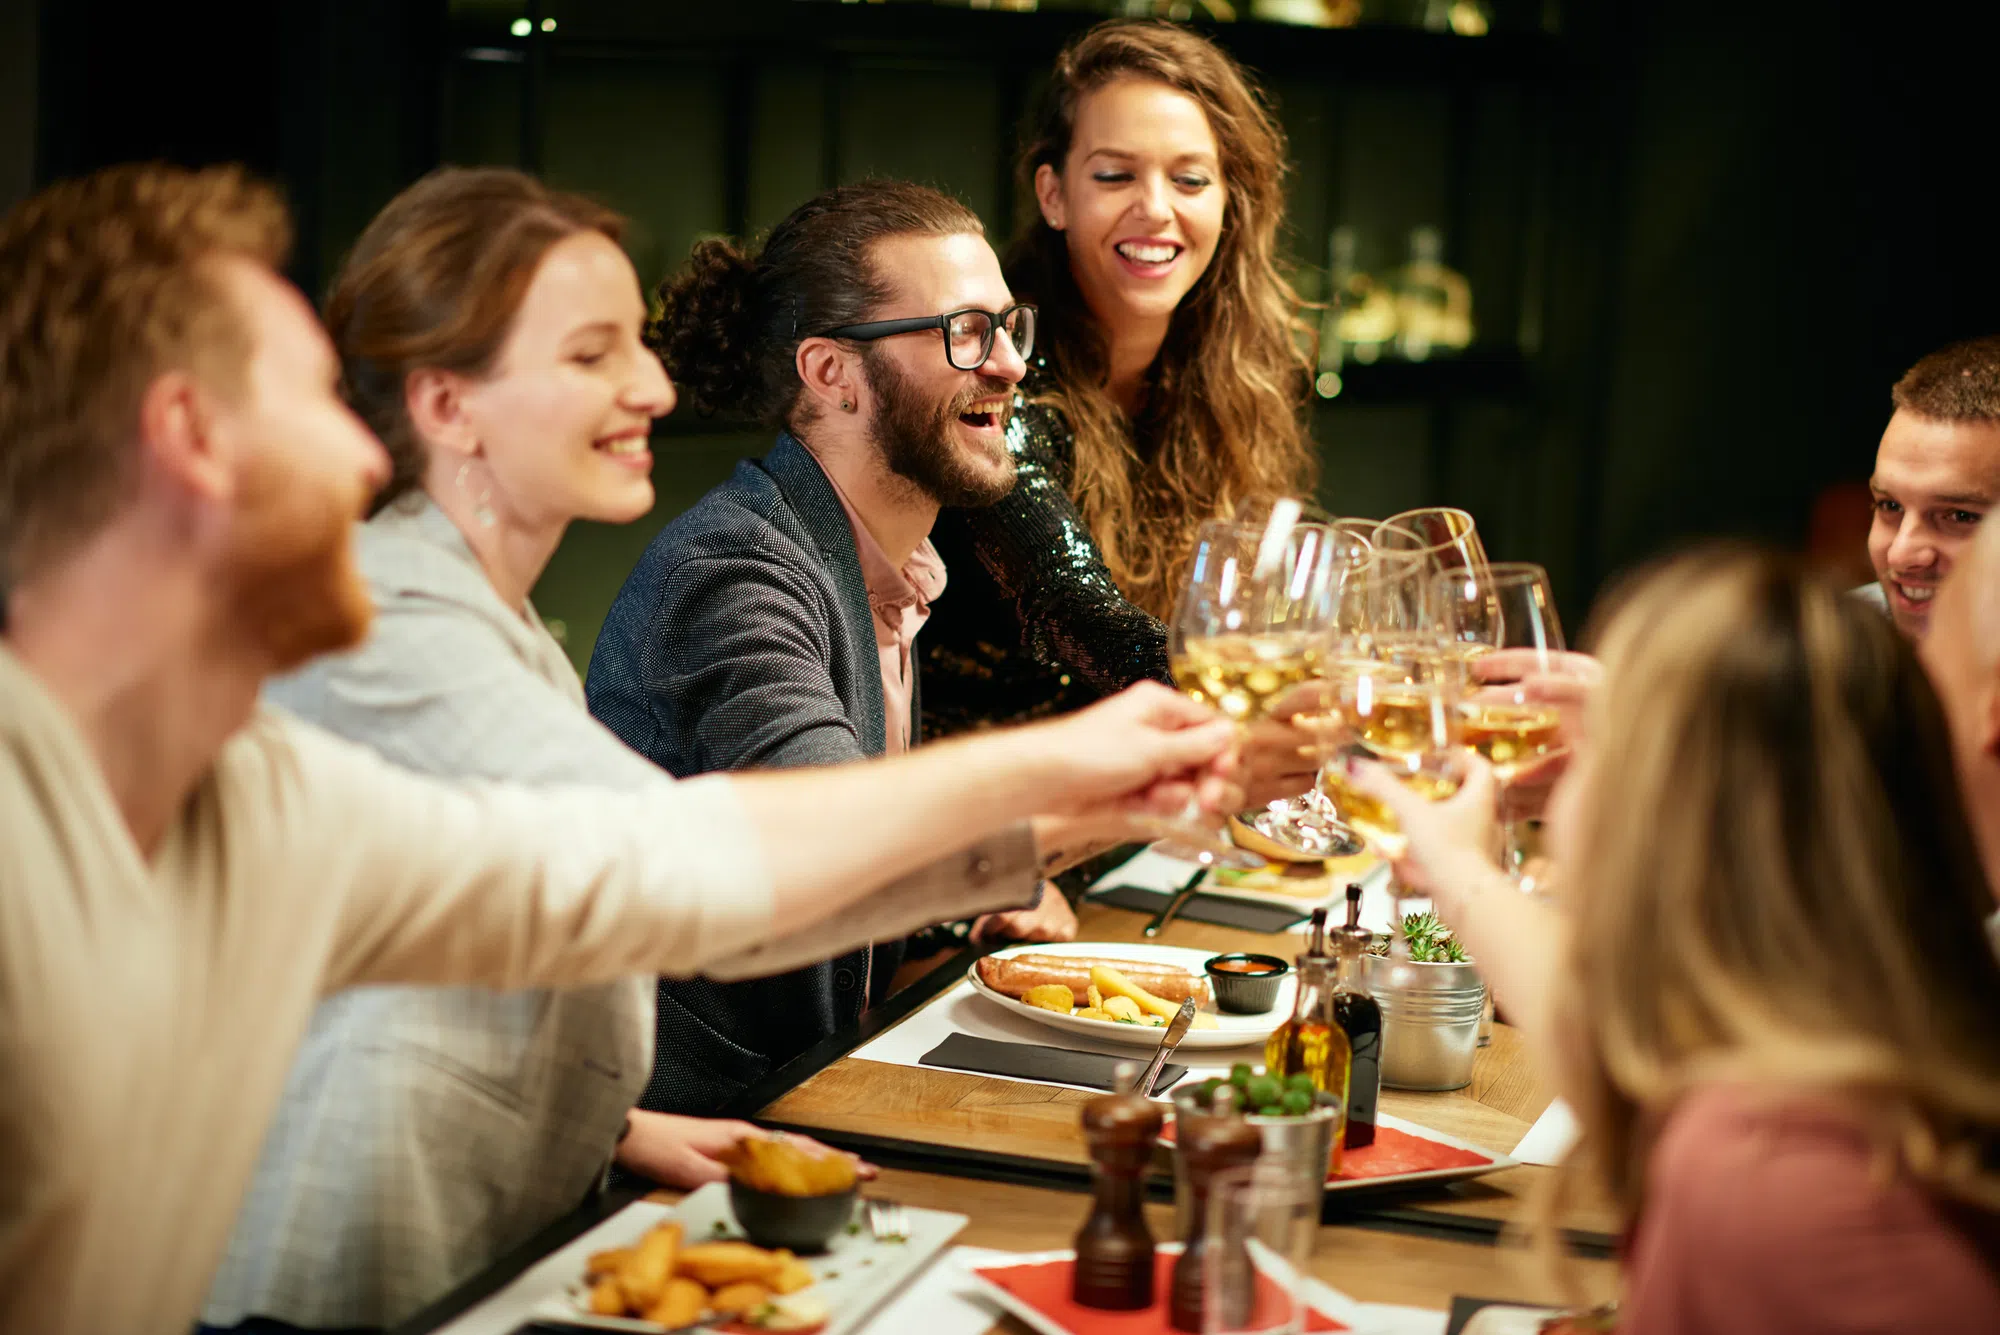 10 Rudest Things you can do in a restaurant